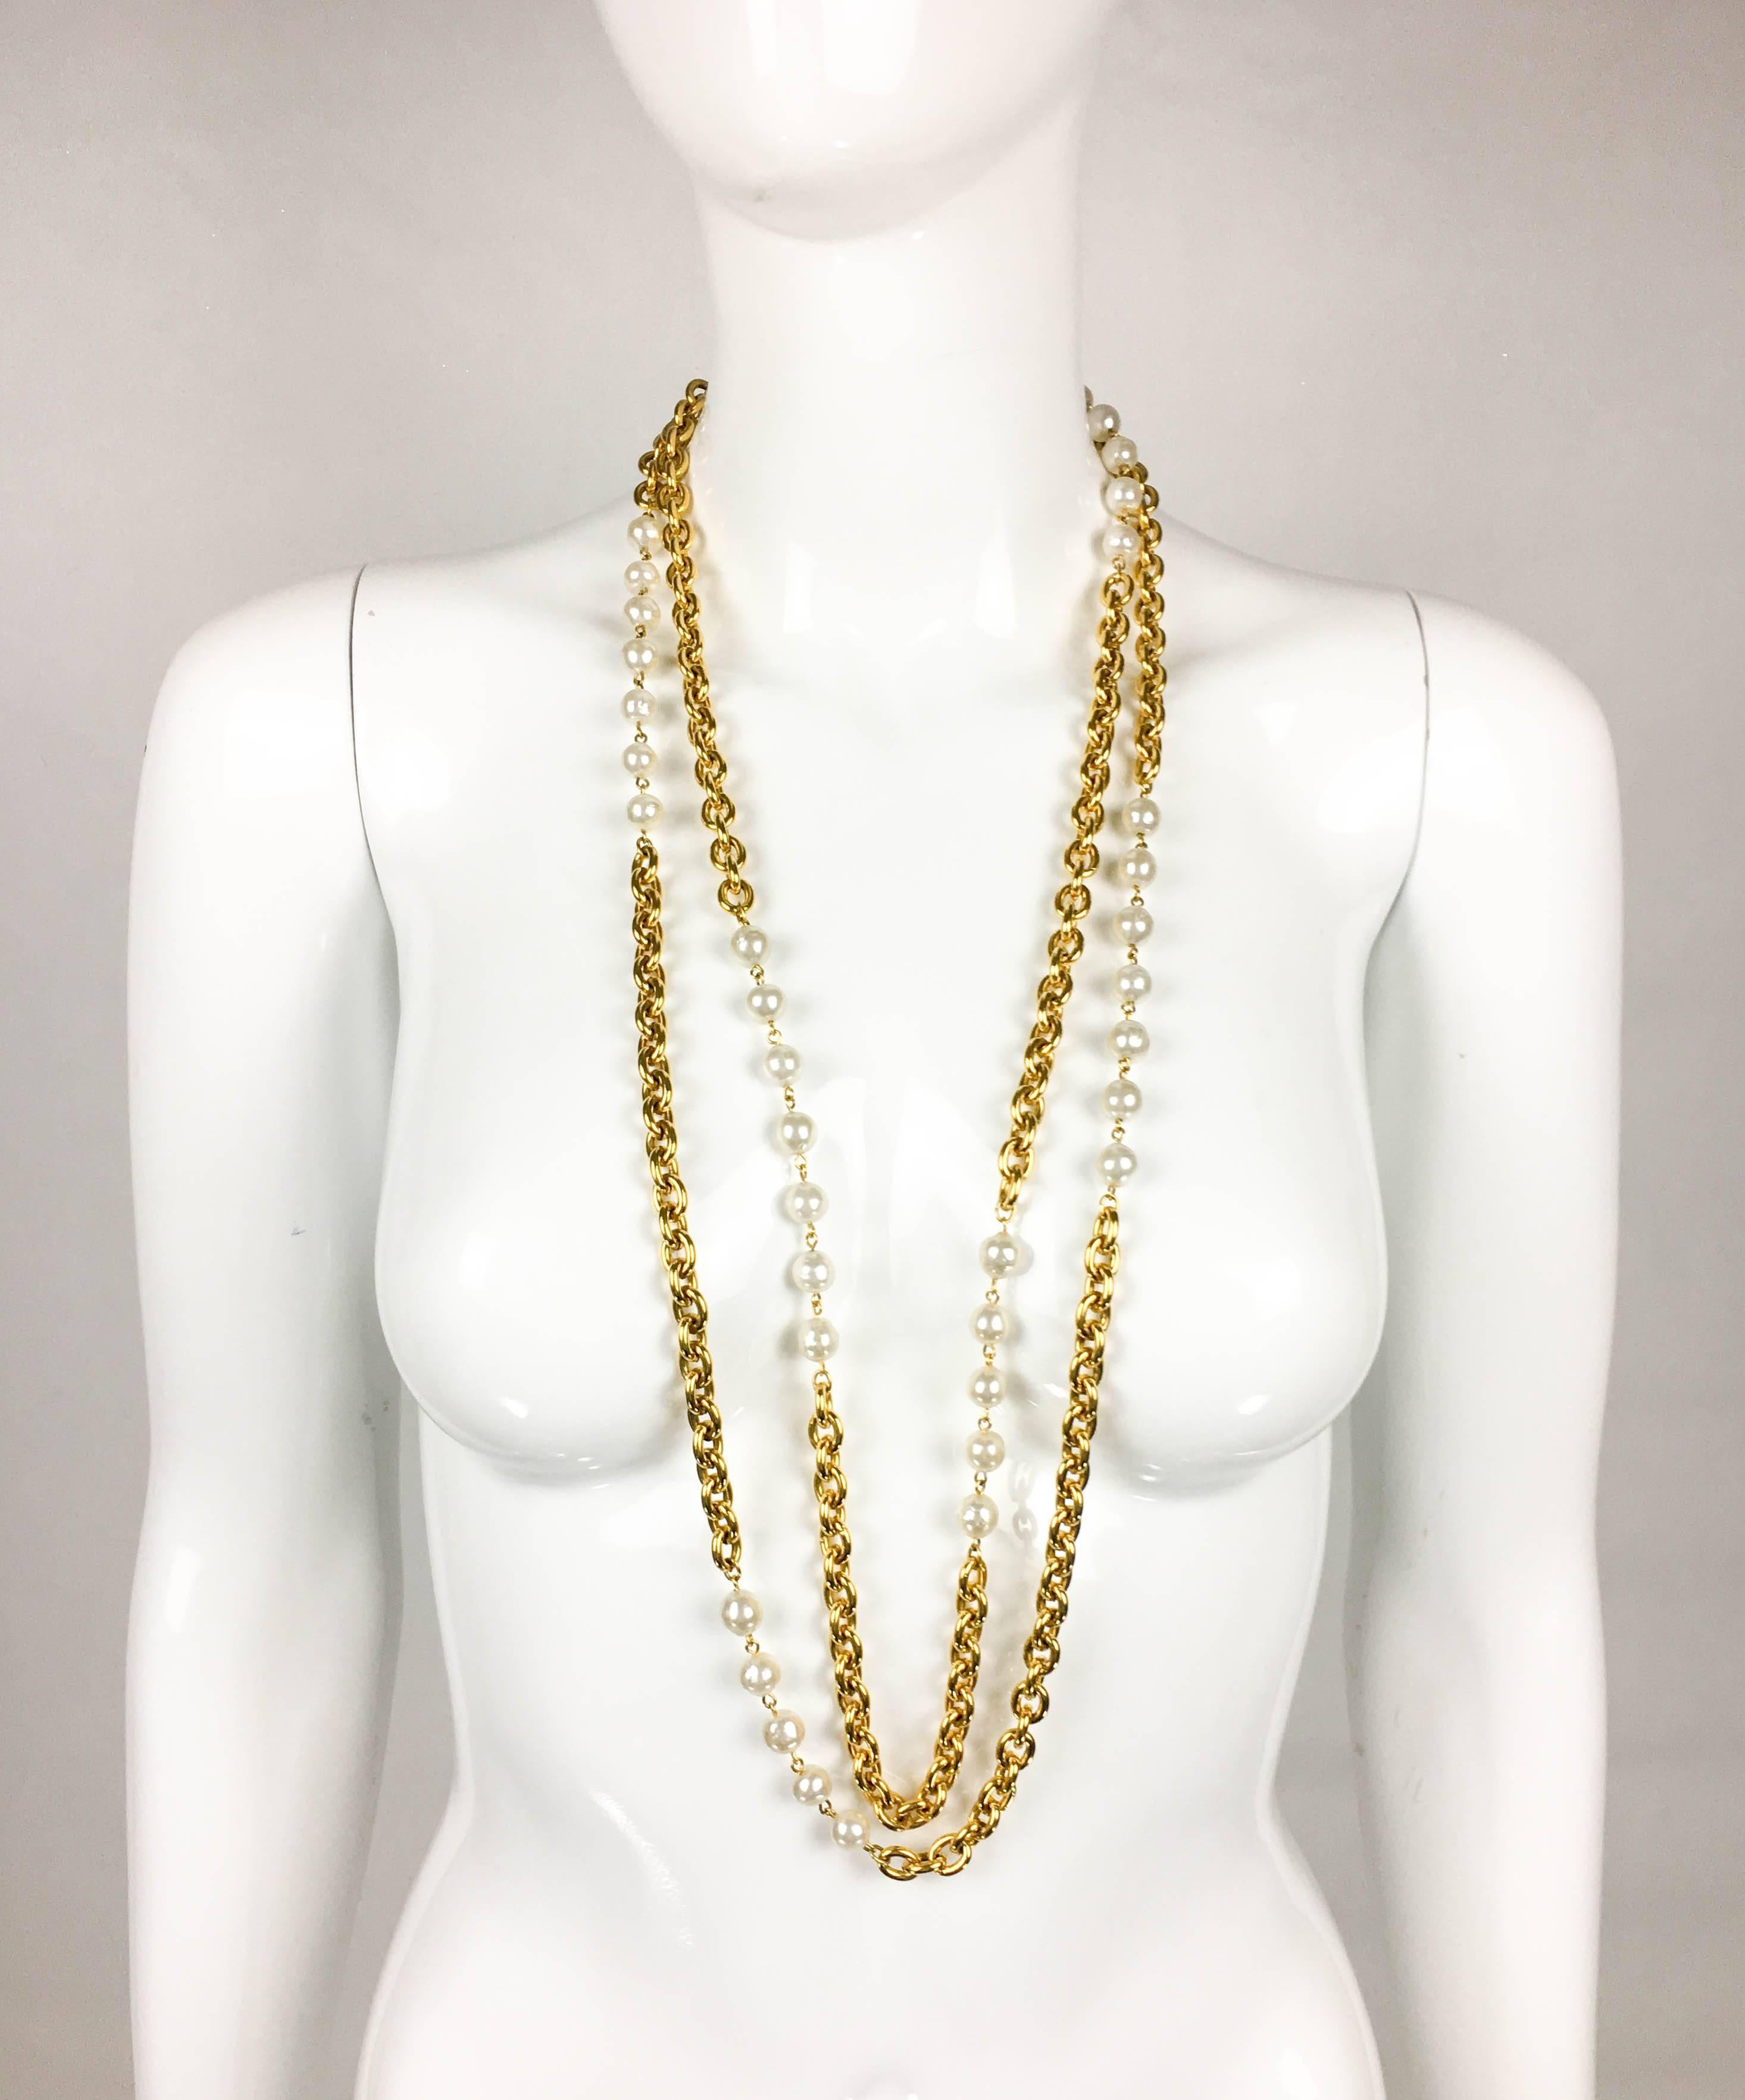 Vintage Chanel Double-Strand Pearl and Gilt Chain Necklace. This beautiful necklace by Chanel dates back from 1984. A creation from Karl Lagerfeld’s first year at the realm of Chanel, identical pieces to it appeared several times on the runway for